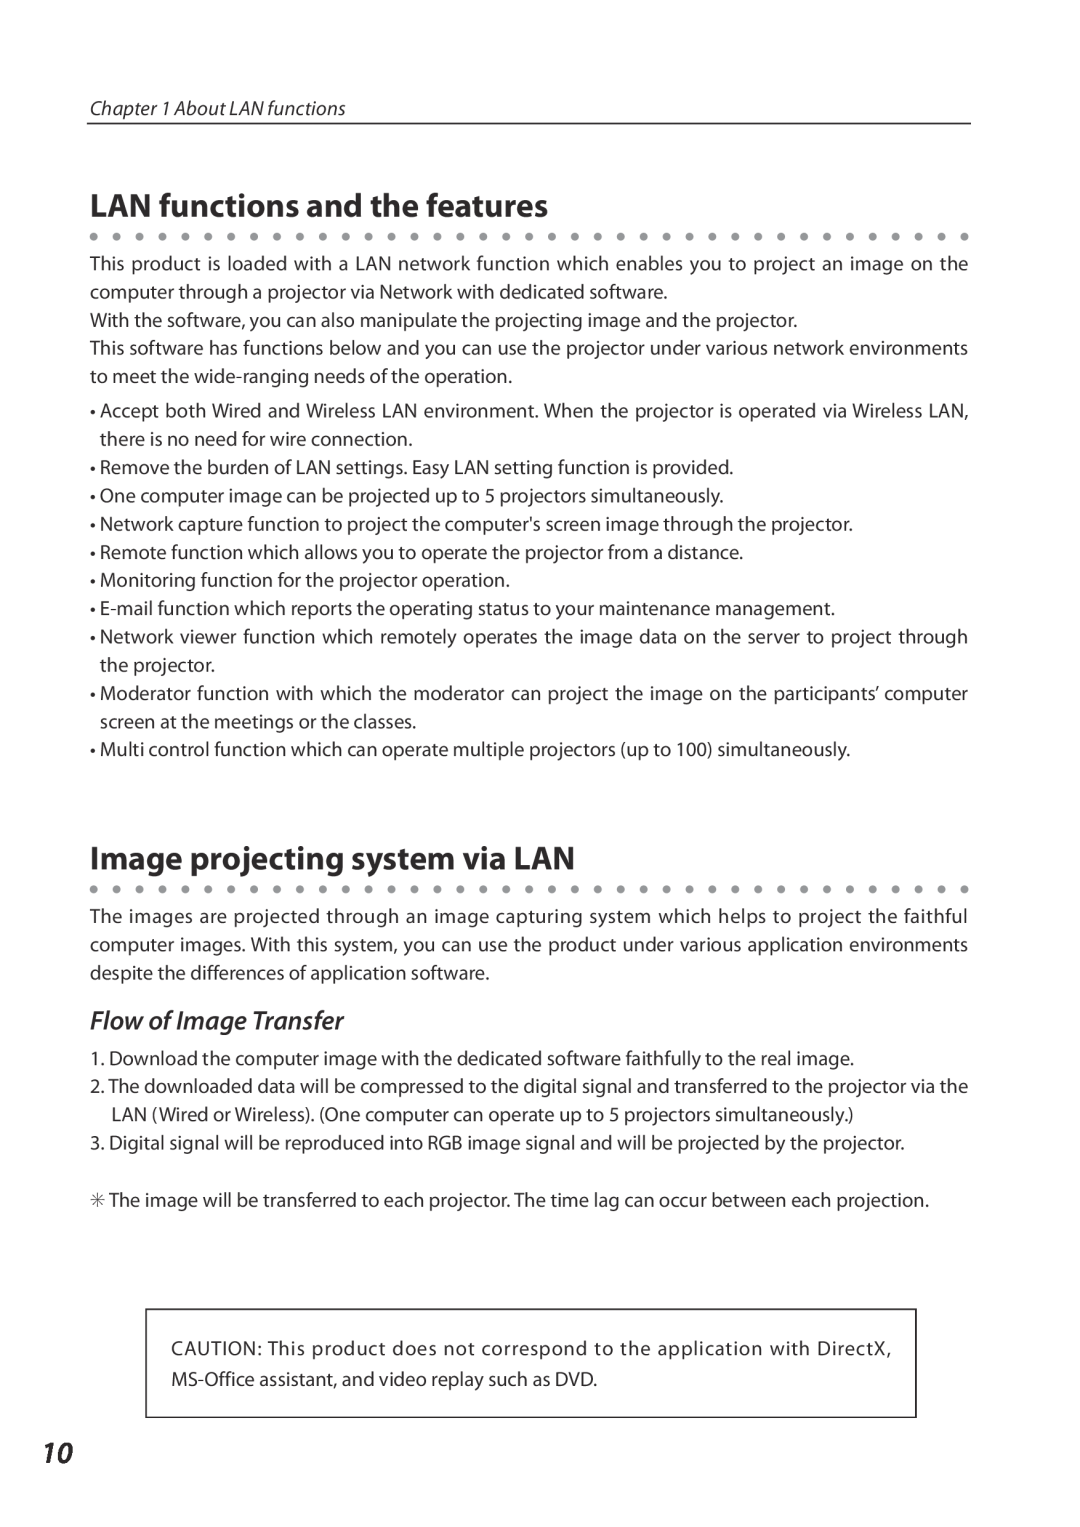 Eiki QXXAVC922---P owner manual LAN functions and the features, Image projecting system via LAN, Flow of Image Transfer 